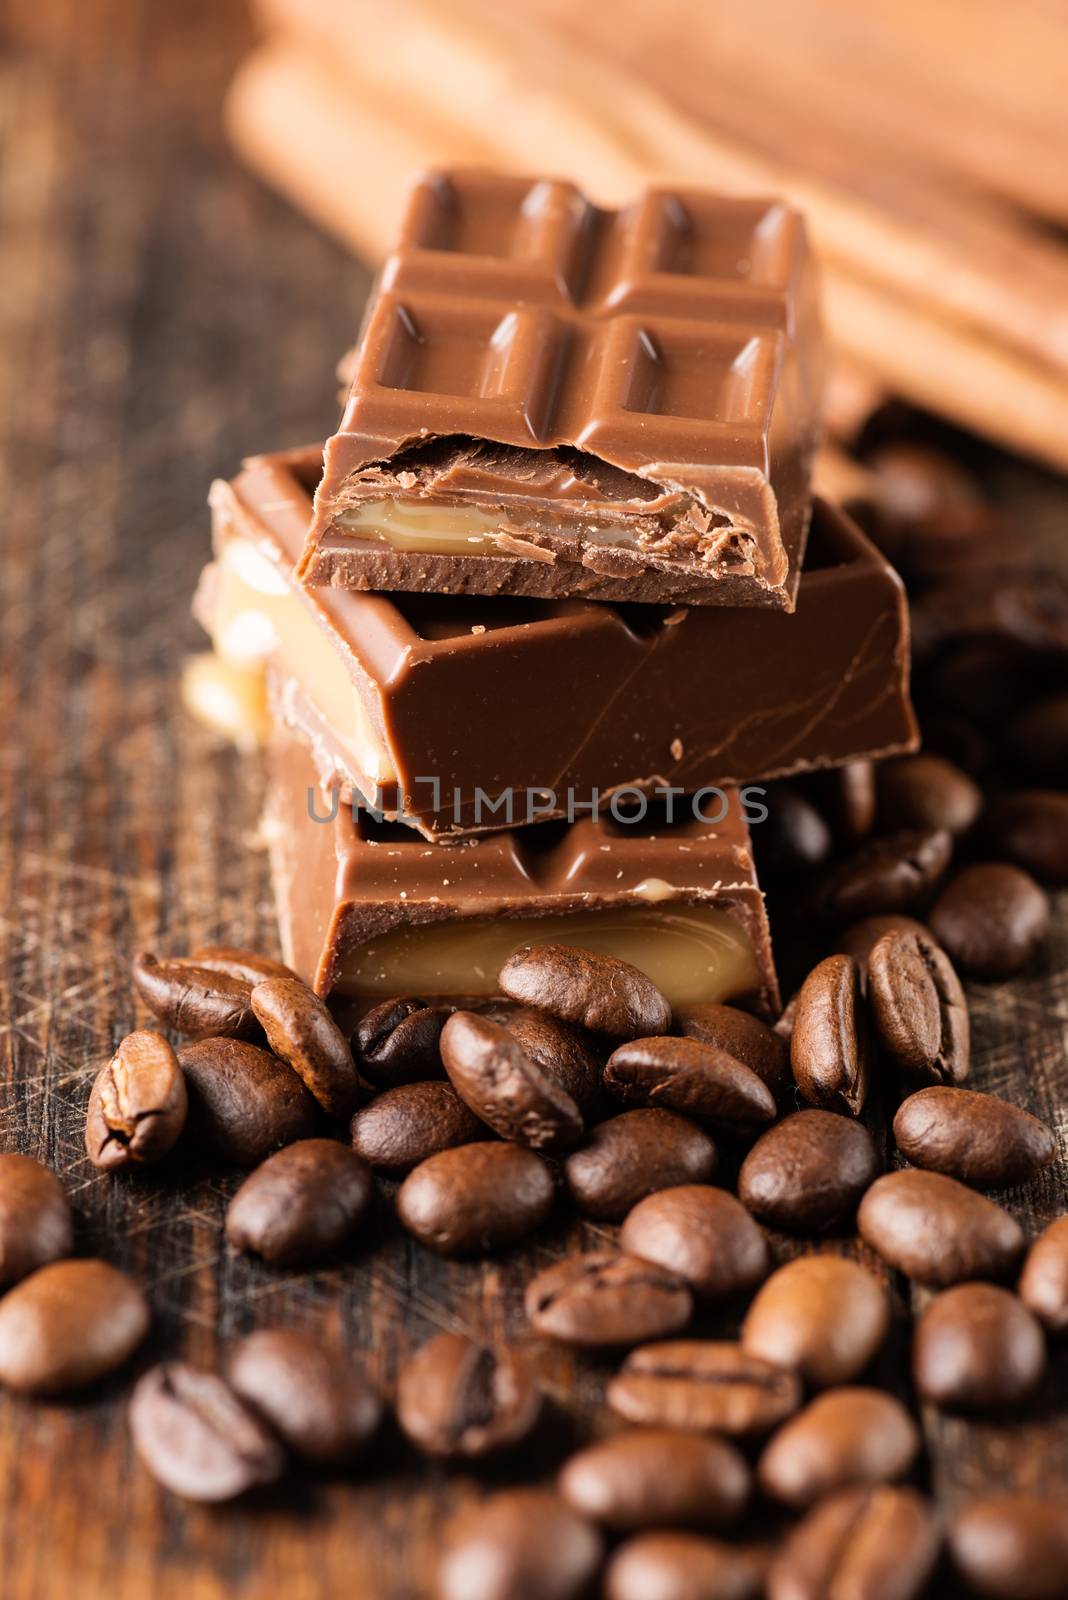 Coffee beans with chocolate bar on wooden table